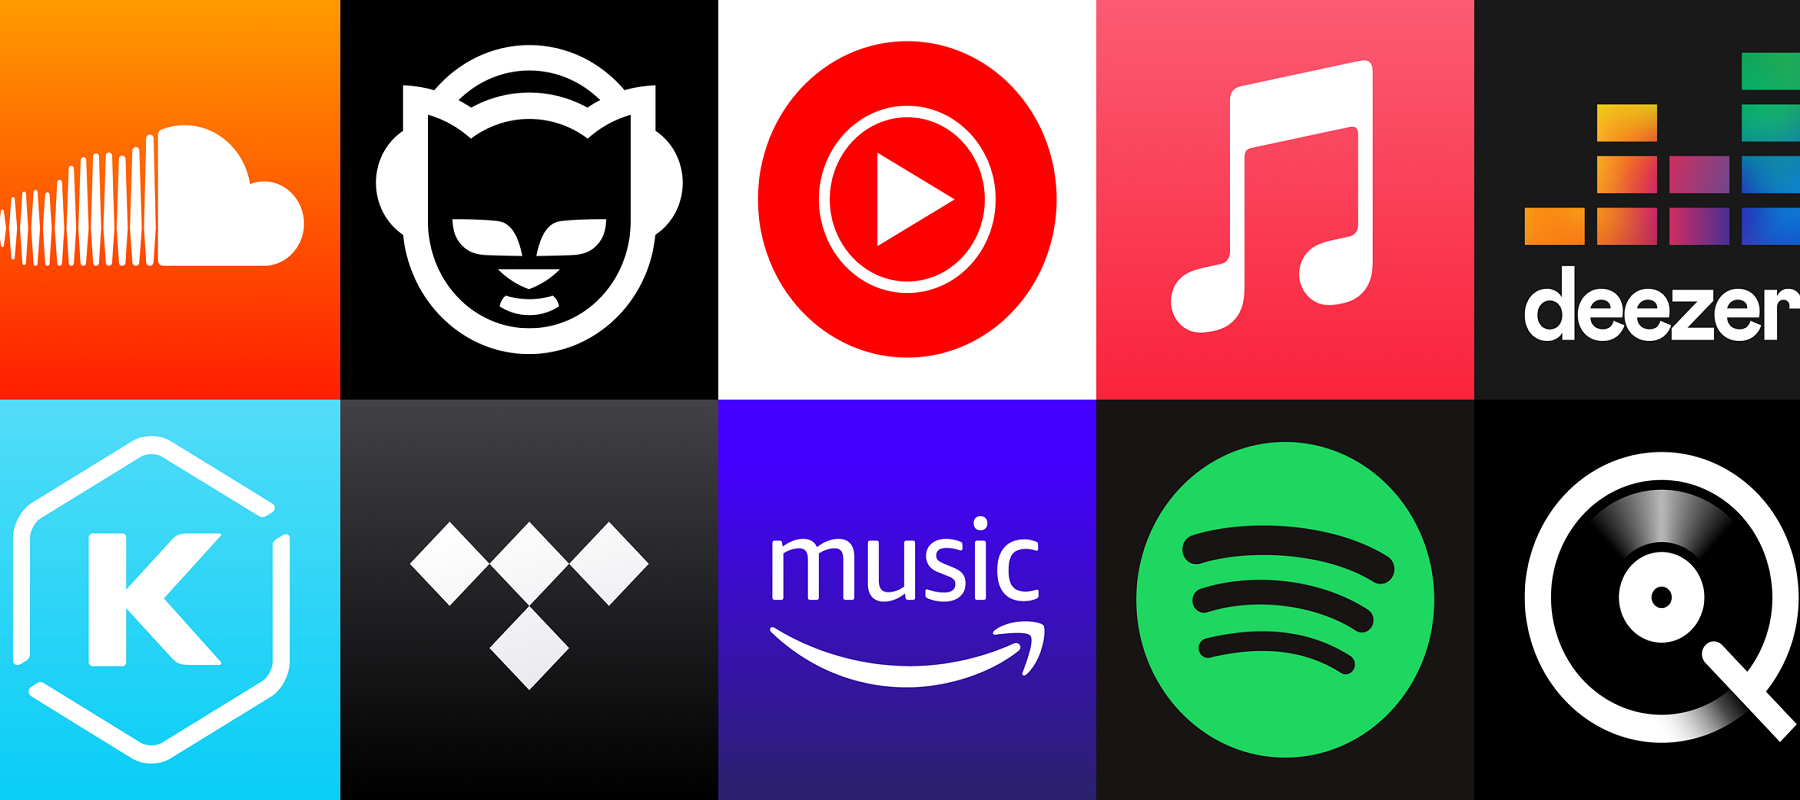 Music streaming platforms have added over 330 million subscribers in the past five years, report